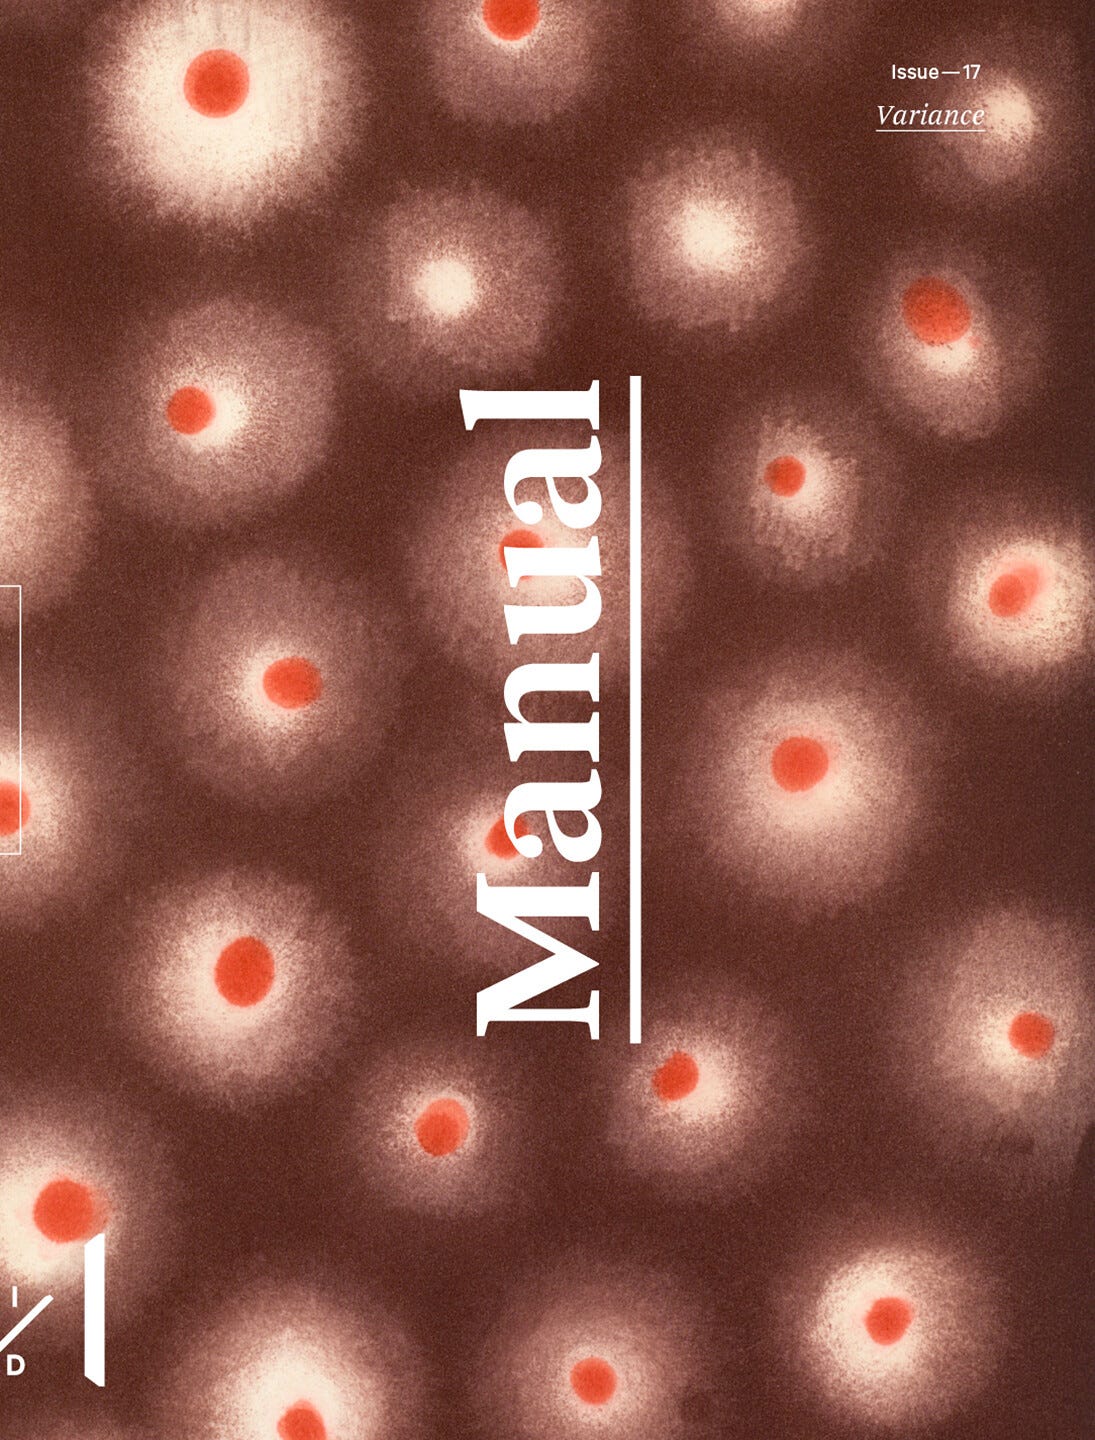 Numerous hazy cream-colored spots with red centers populate a dark brown background.